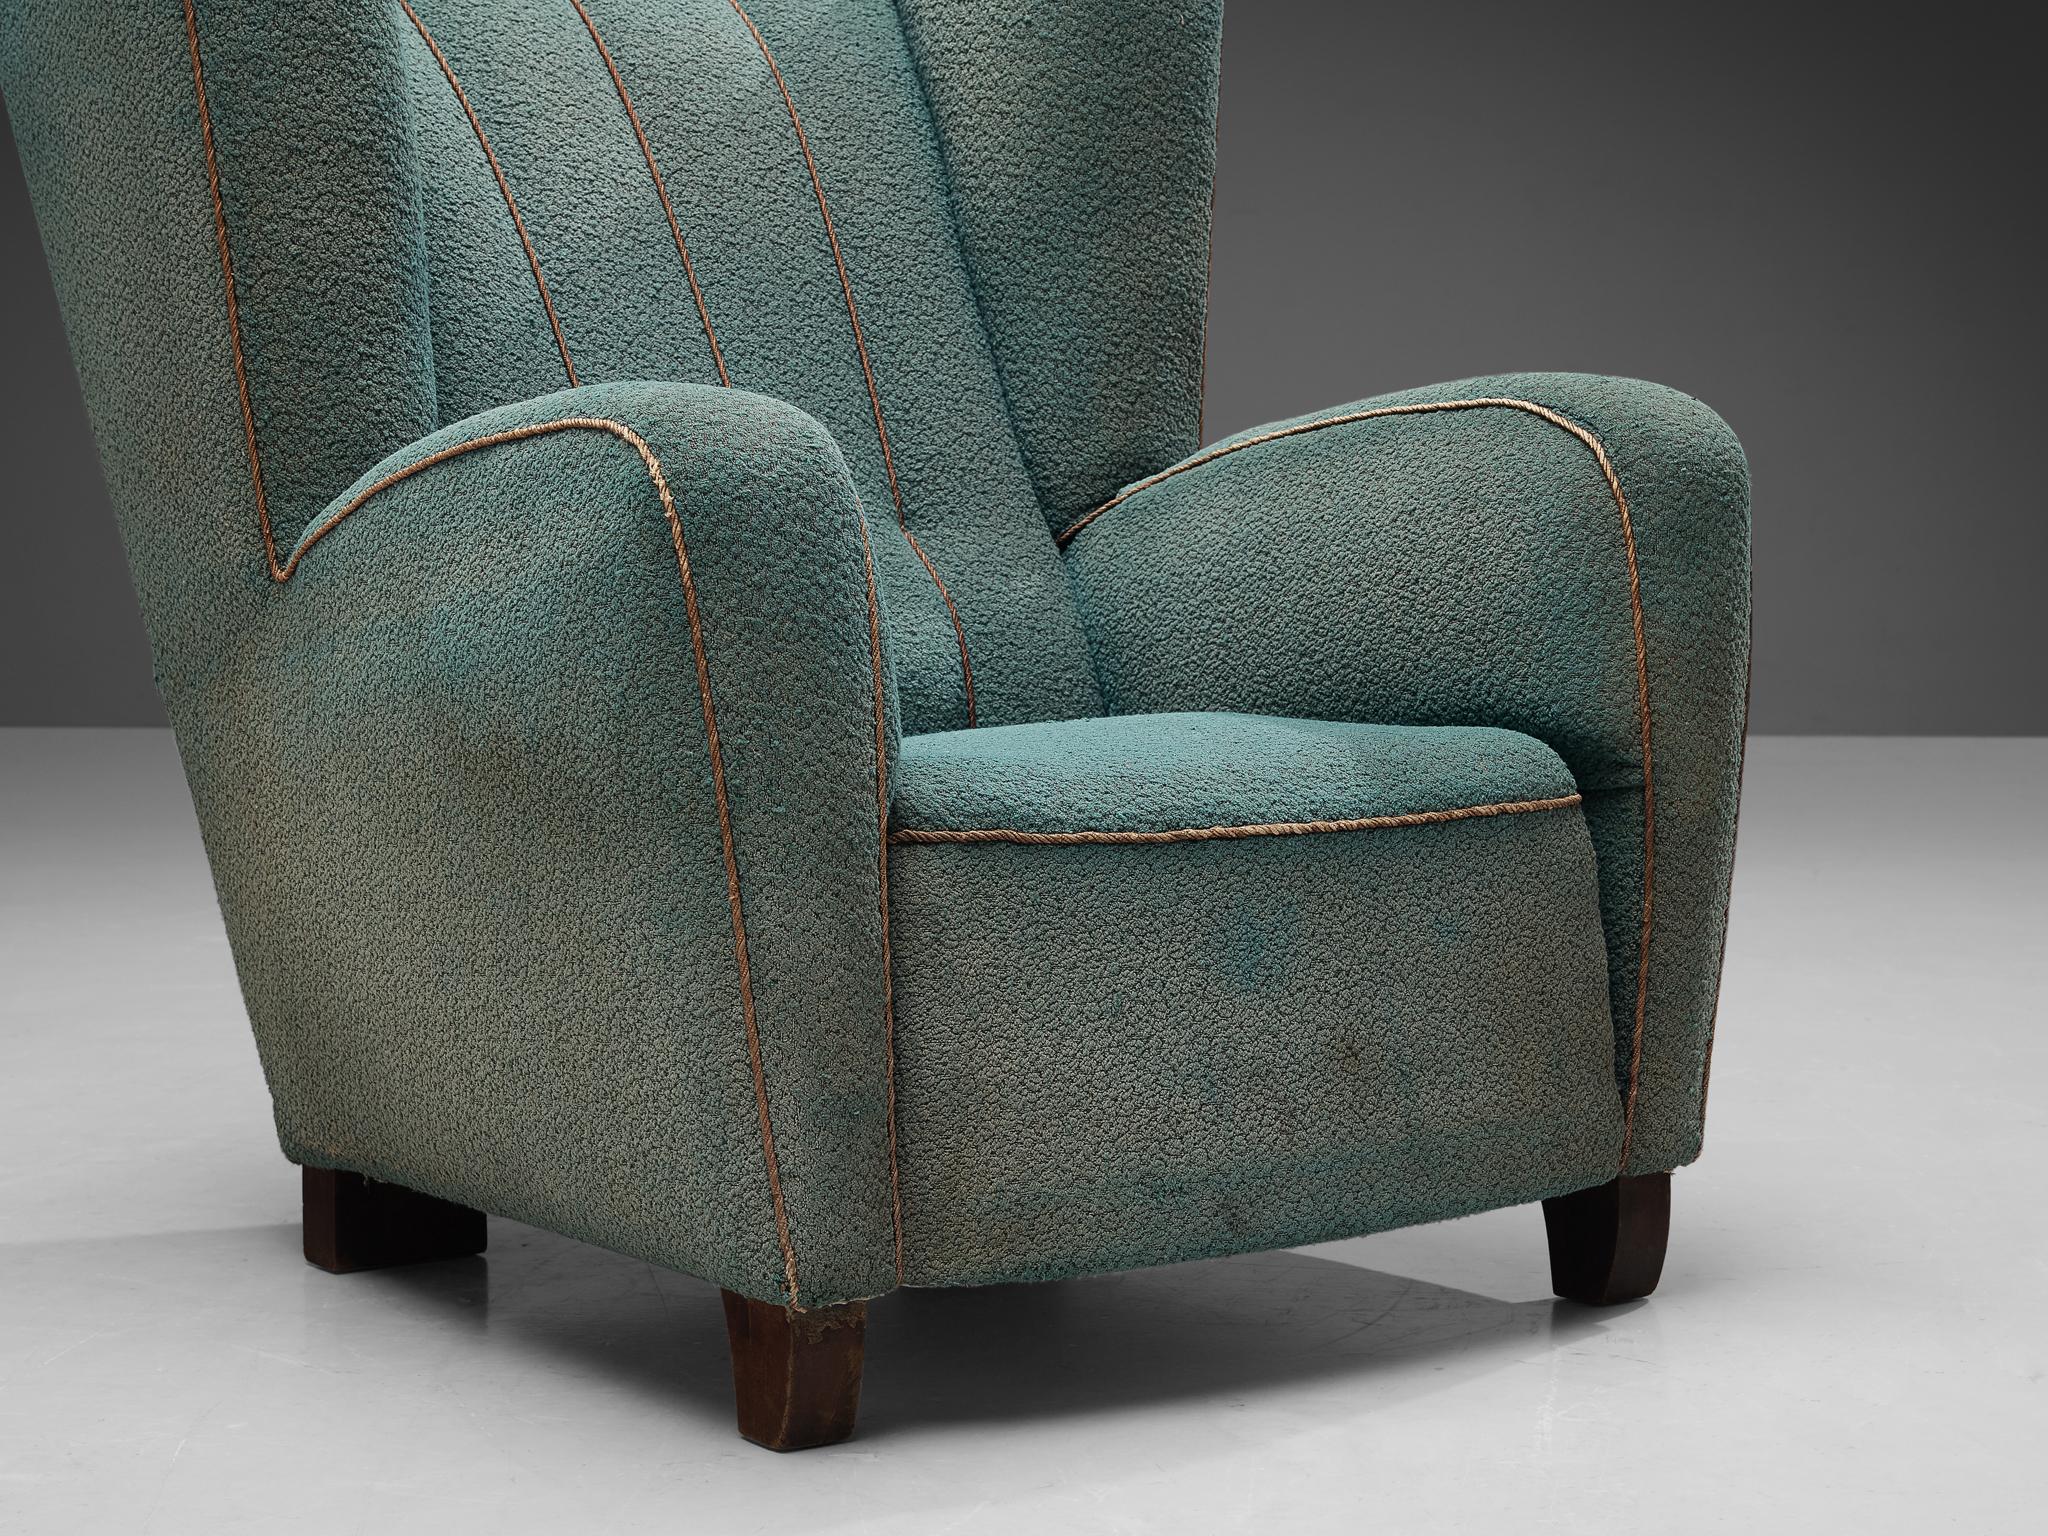 Fabric Scandinavian Wingback Chair in Ocean Blue Upholstery For Sale